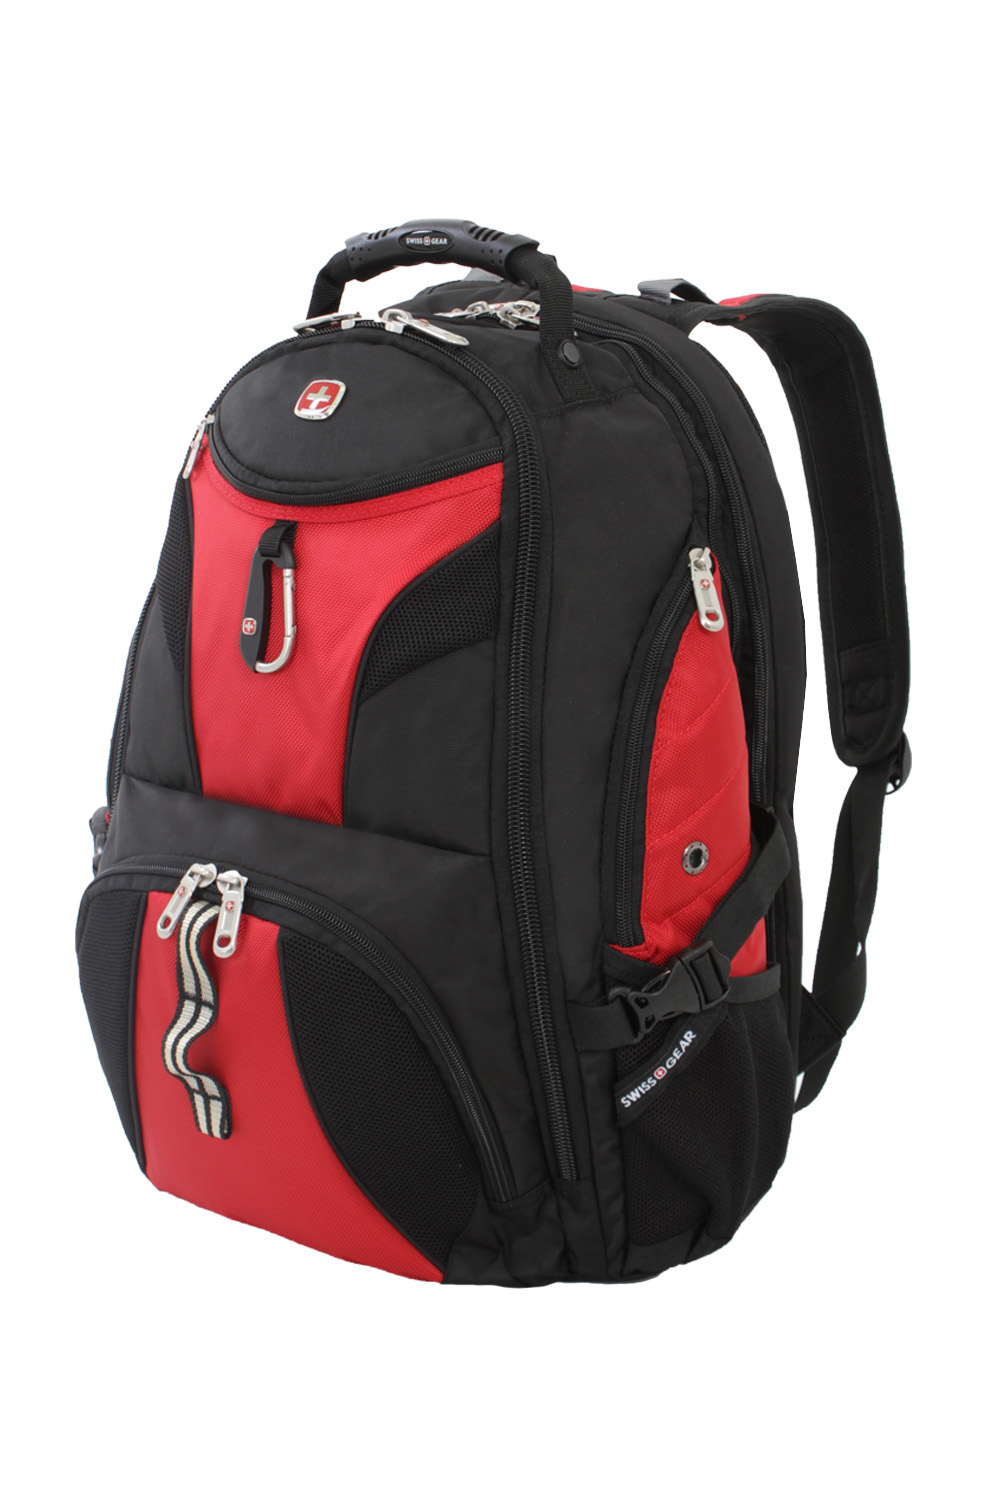 STYLISH SWISSGEAR SA-1418 14~16 inches Laptop Backpack Notebook Bag-Sale!  £39.99 - PicClick UK